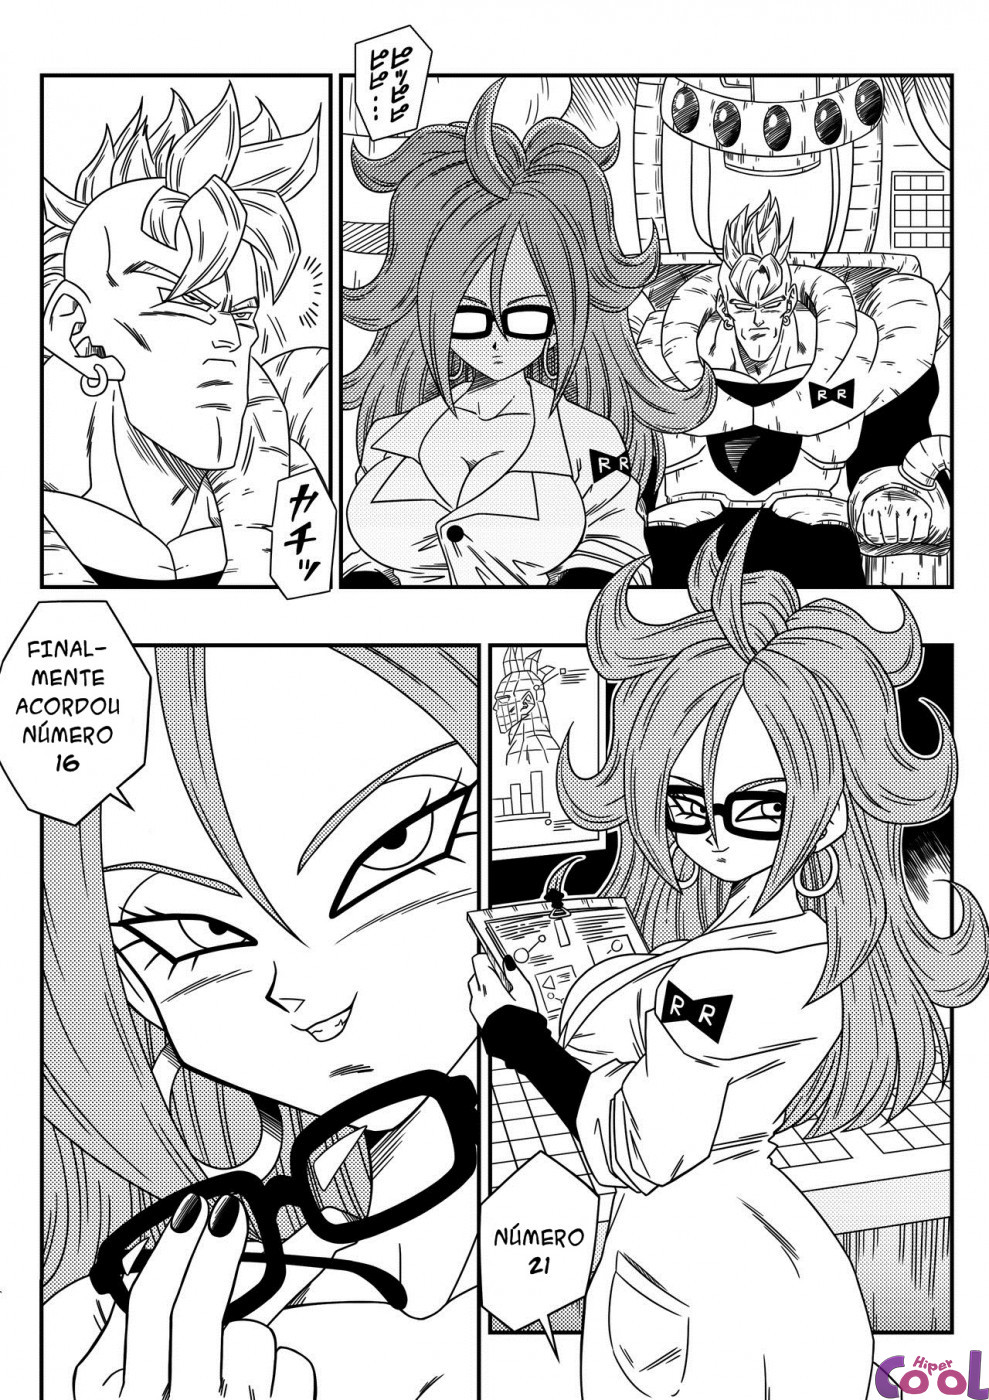 [Yamamoto] Kyonyuu Android Sekai Seiha o Netsubou!! Android 21 Shutsugen!! | Busty Android Wants to Dominate the World! (Dragon Ball FighterZ) [Portuguese-BR] {Hiper.cooL} 